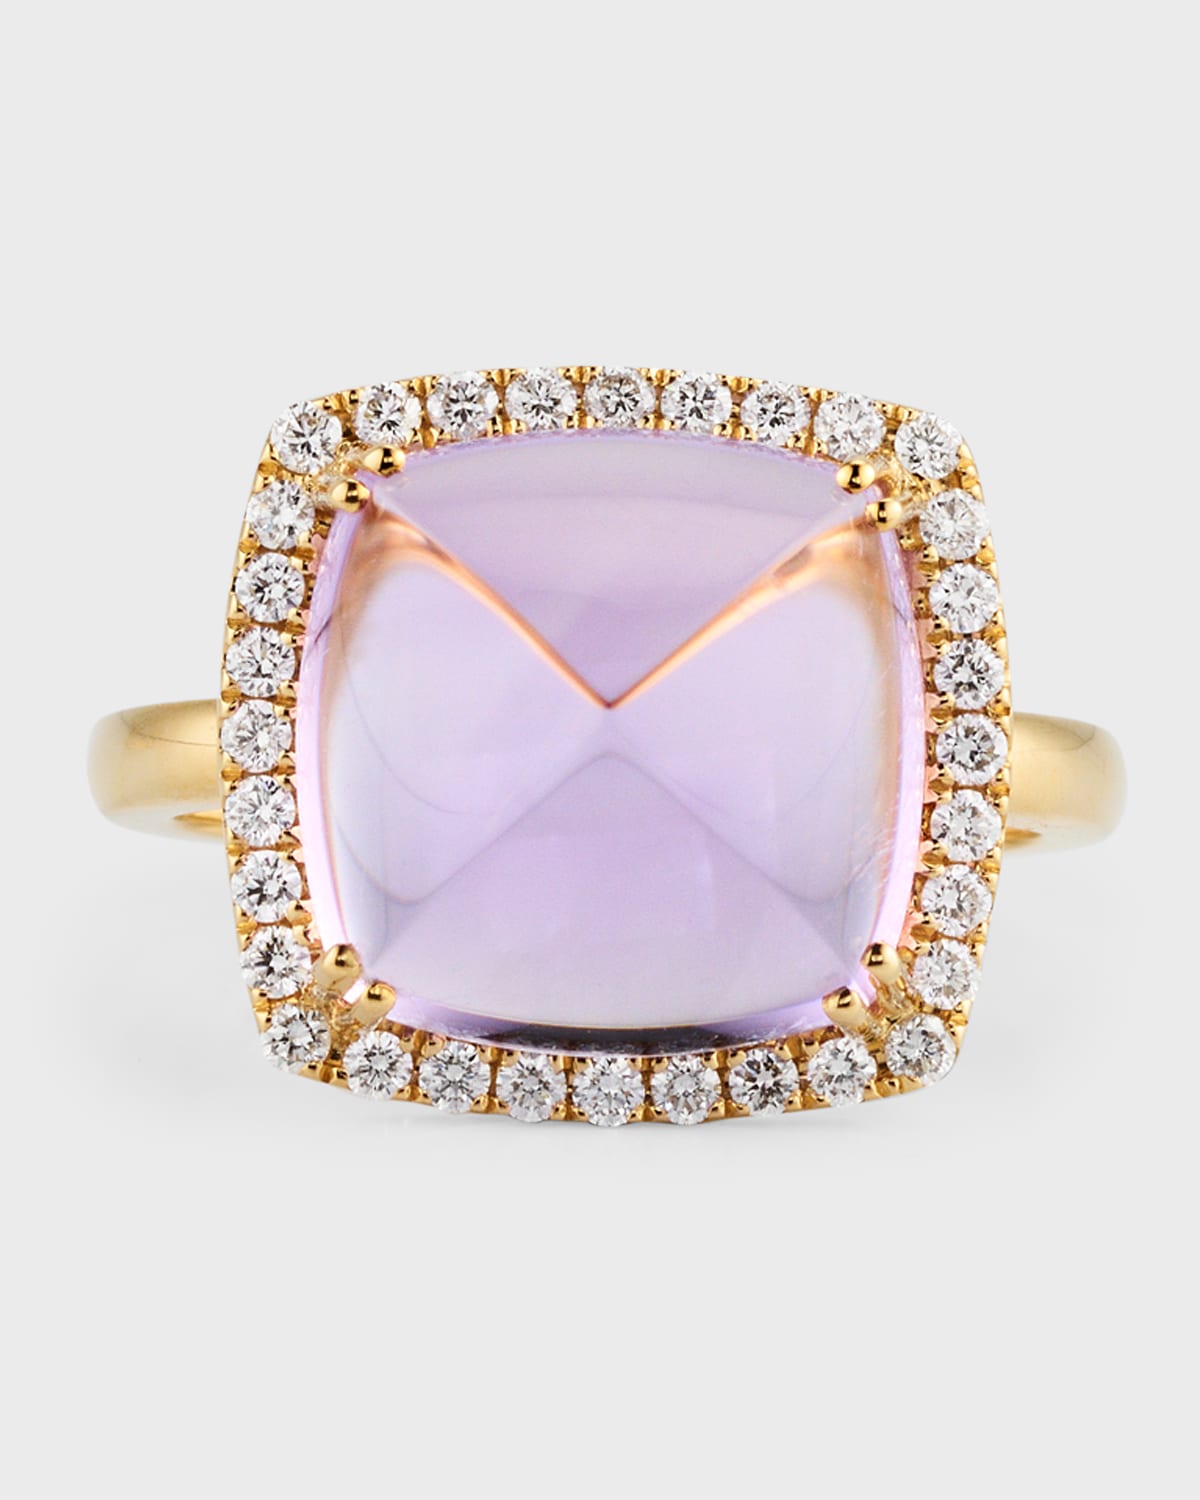 18K Yellow Gold Ring with Amethyst and Diamonds, Size 7, 8.52tcw